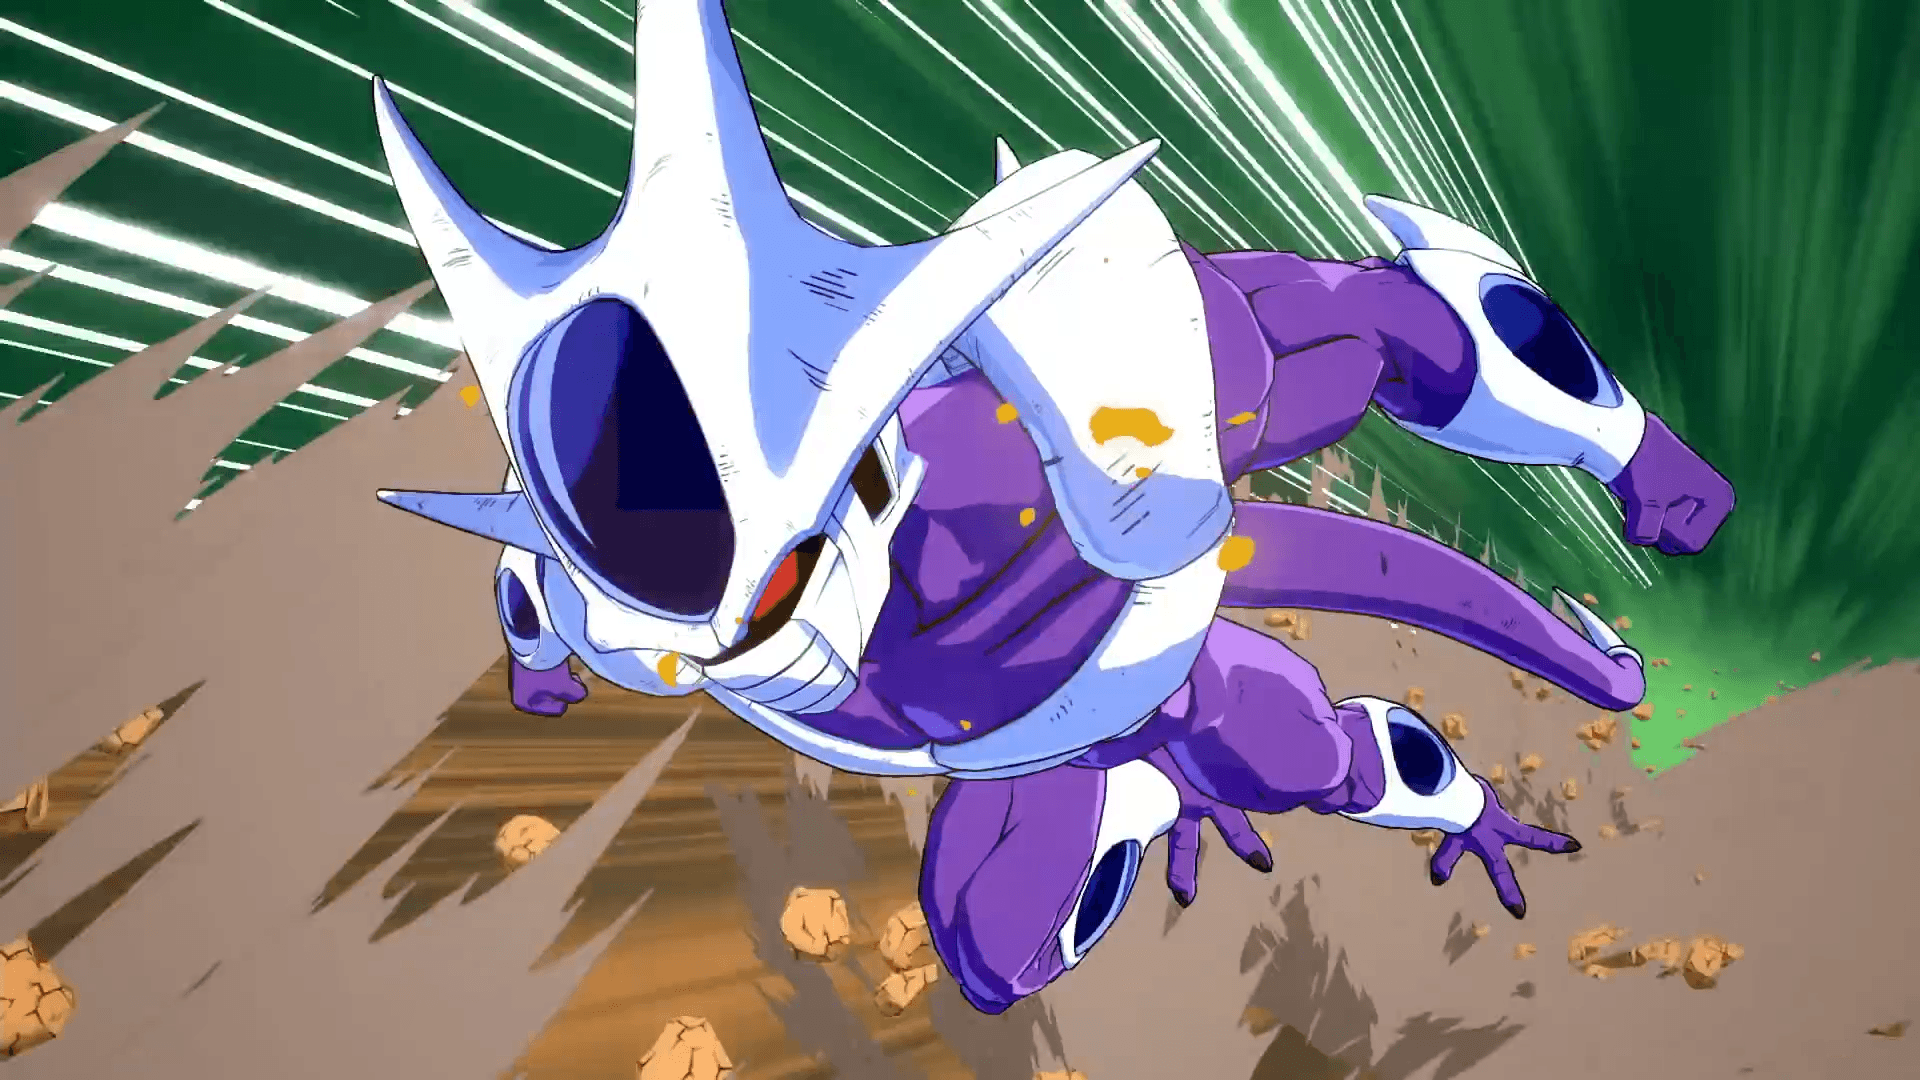 Download Cooler Dragon Ball wallpapers for mobile phone free Cooler  Dragon Ball HD pictures